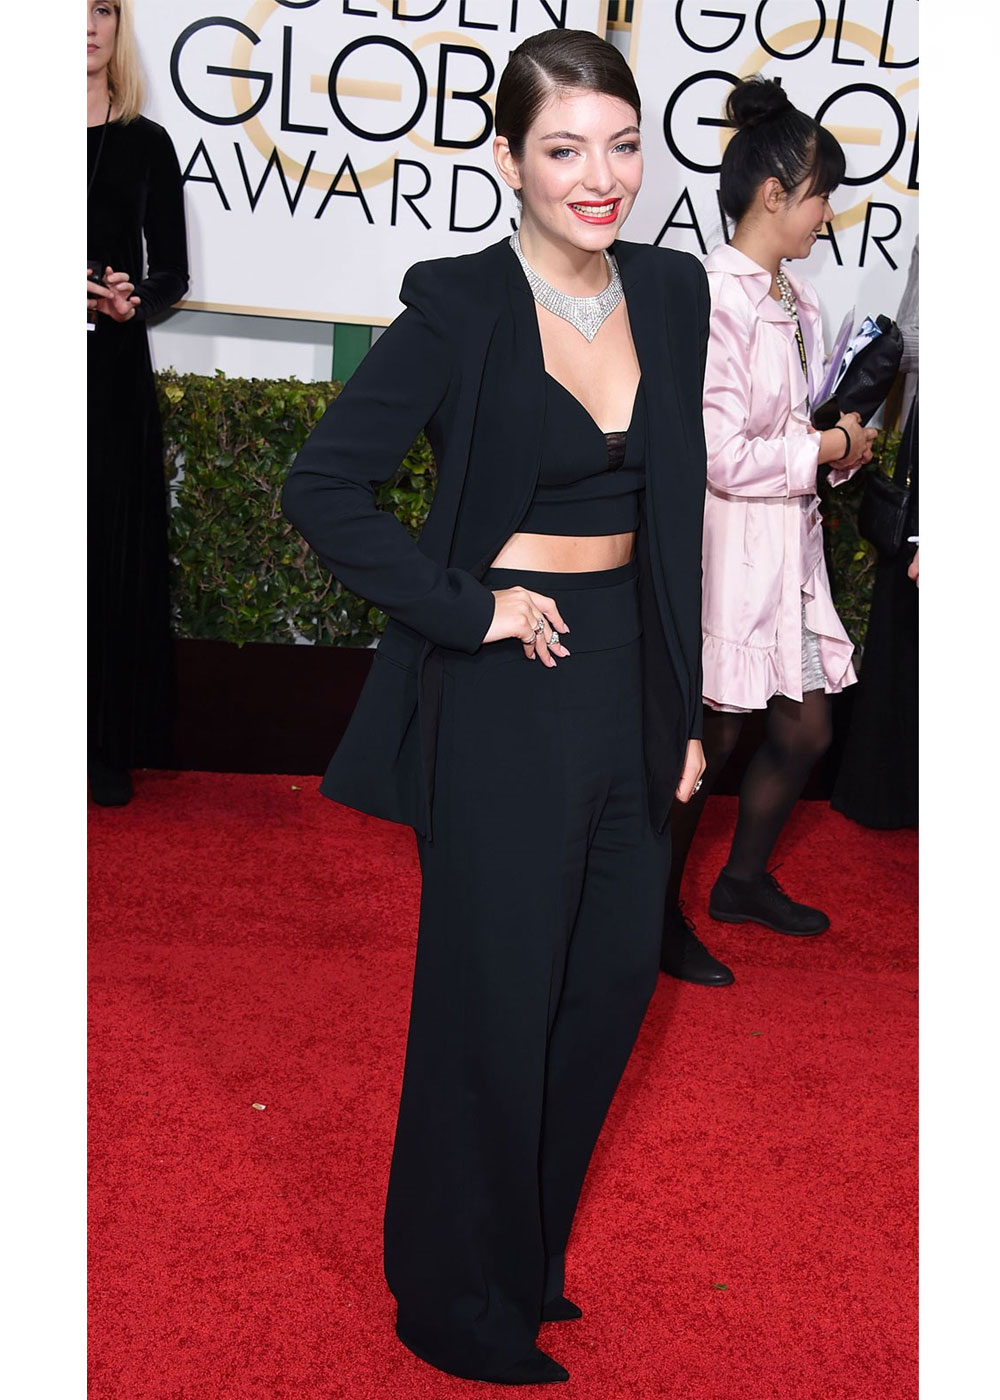 Lorde avoided the traditional gown and instead chose a chic black pantsuit by Narciso Rodriguez for the 2015 Golden Globes.